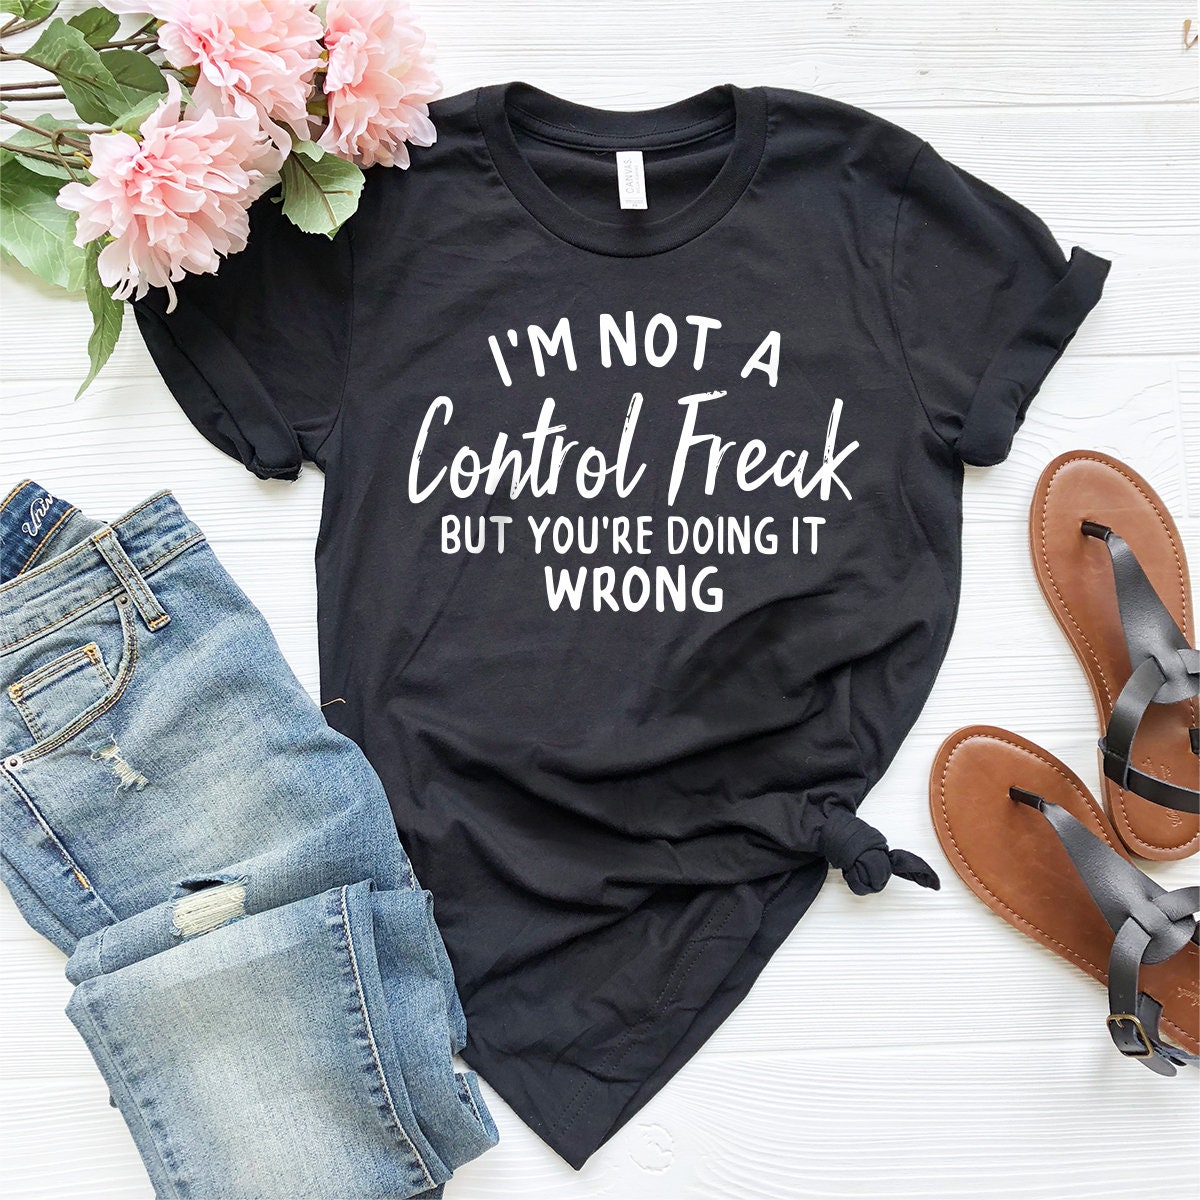 Funny Saying Shirt, Sarcastic T-Shirt, Control Freak Shirt, I'm Not A Control Freak Shirt, You're Doing It Wrong Tee, Funny Gift For Friend - Fastdeliverytees.com